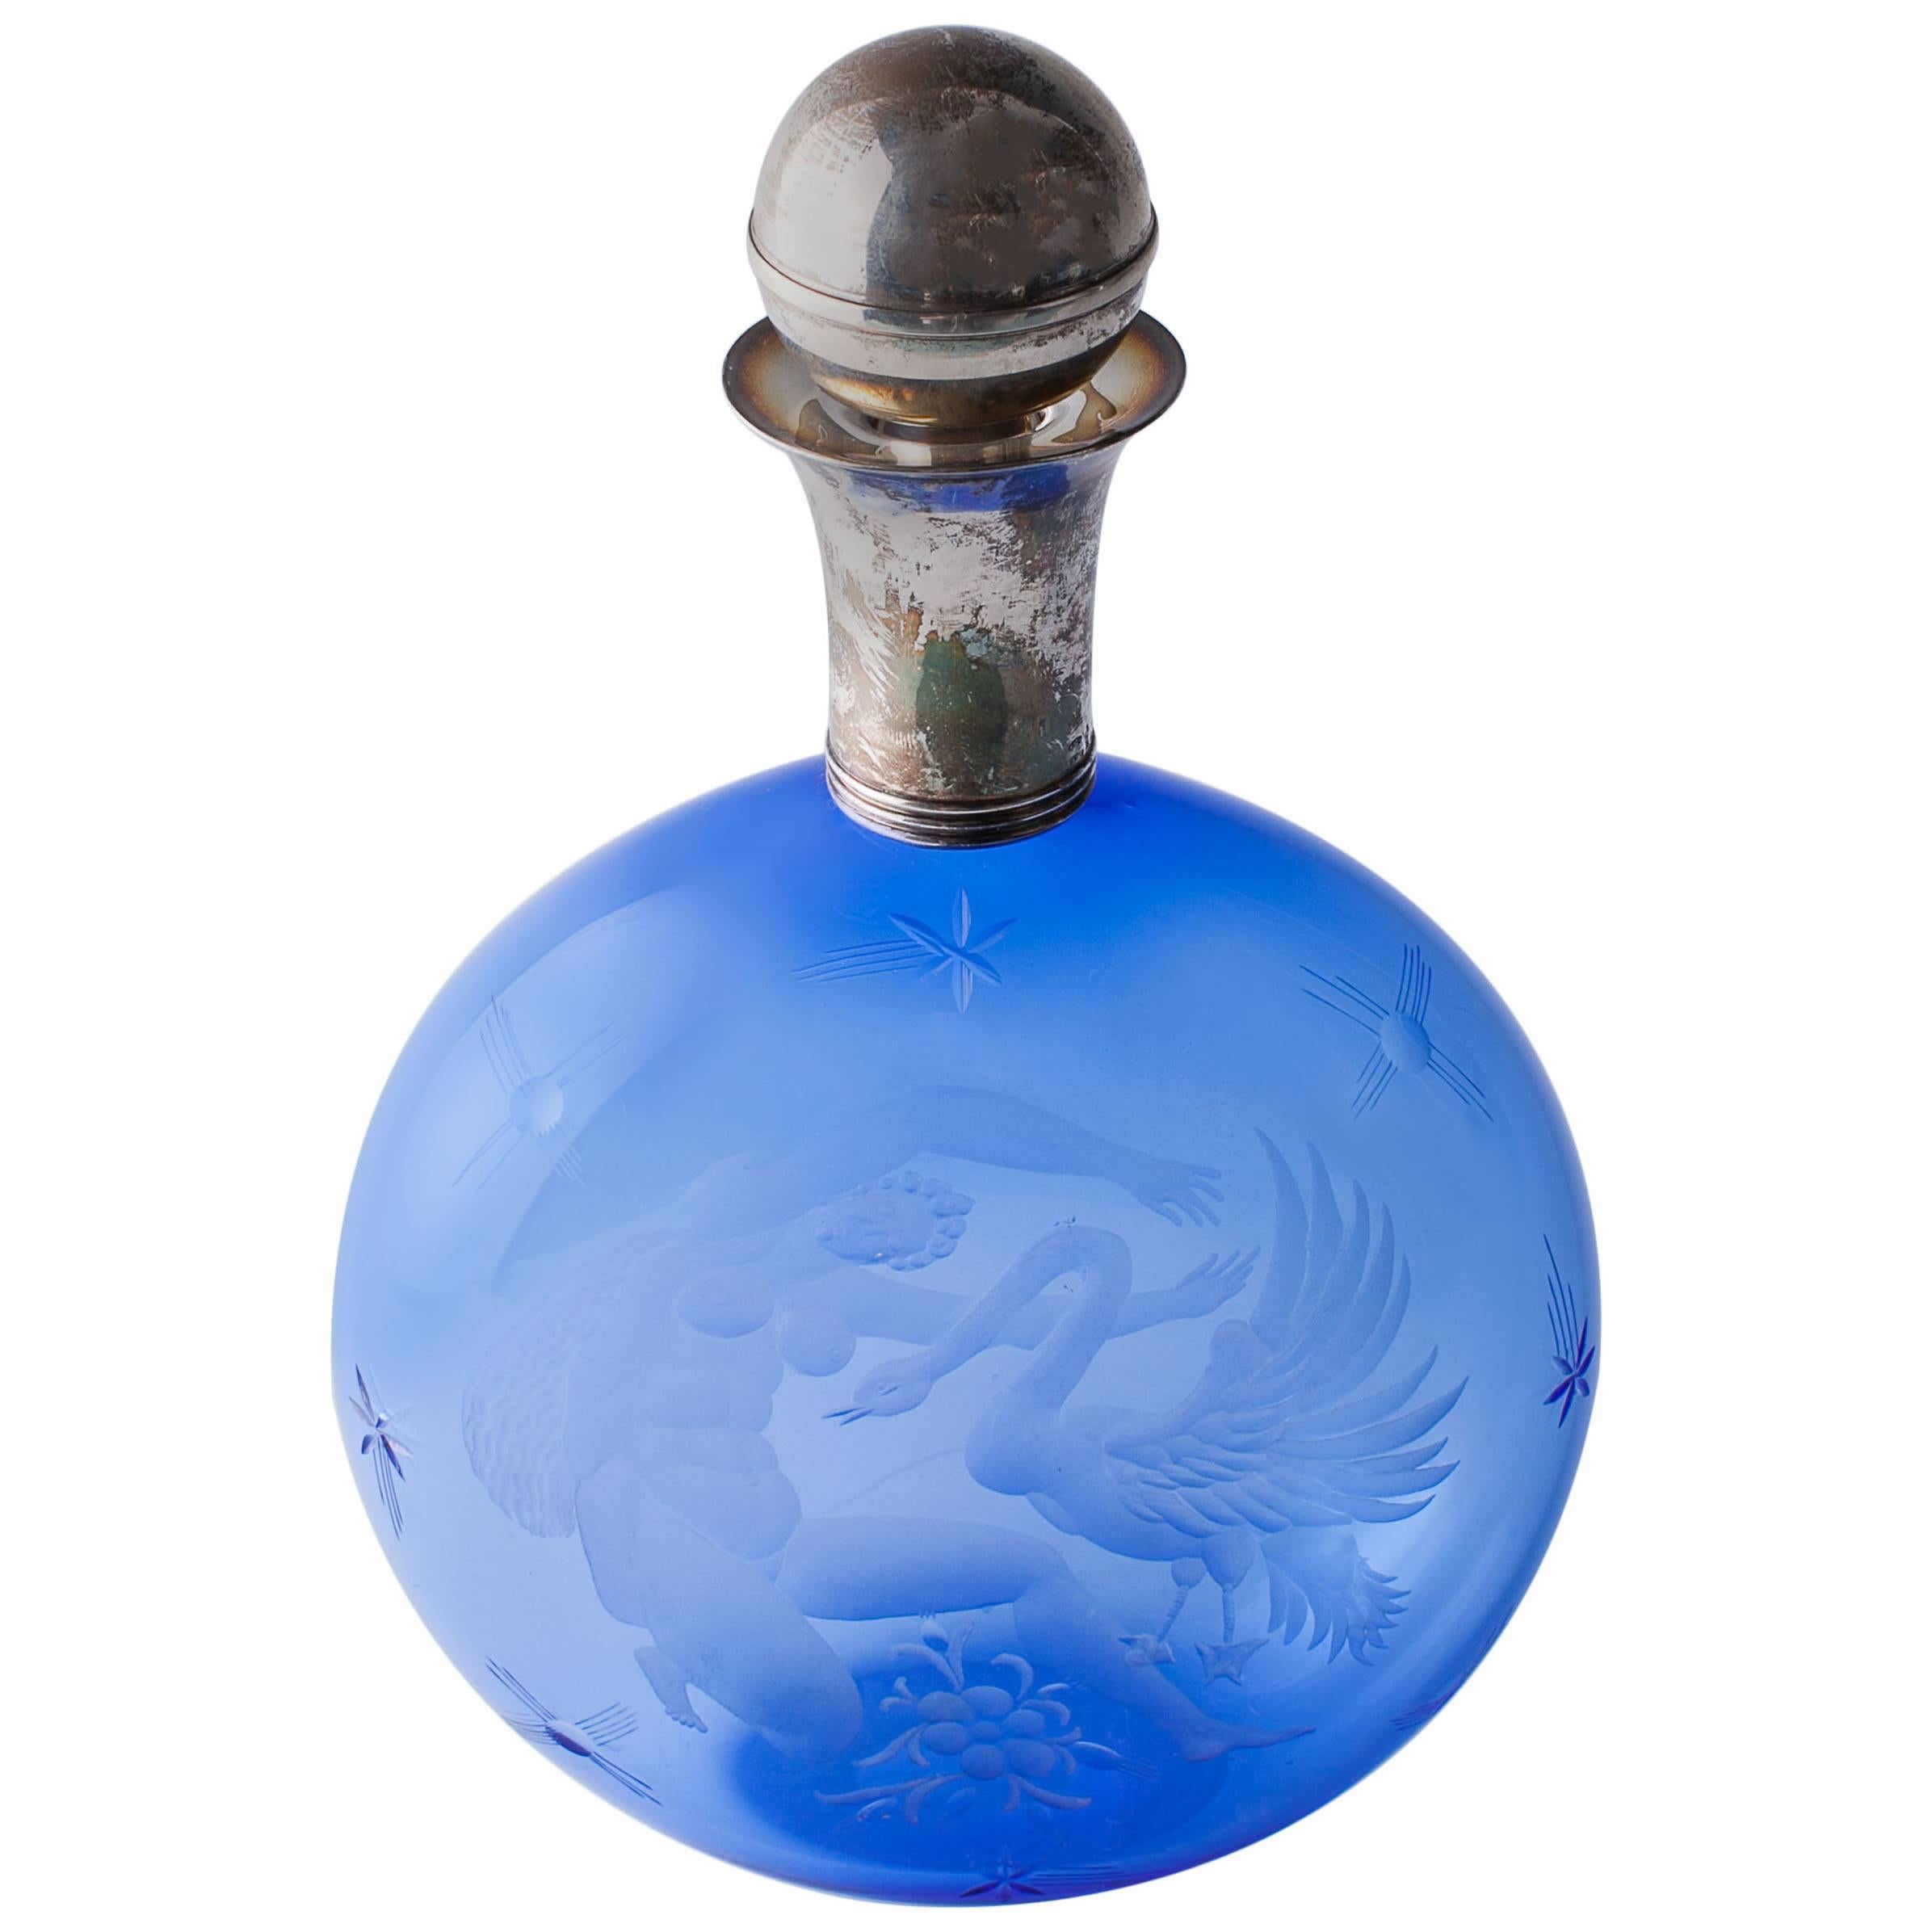 Bottle 'Leda and the Swan' by Guido Balsamo Stella for S.A.L.I.R For Sale